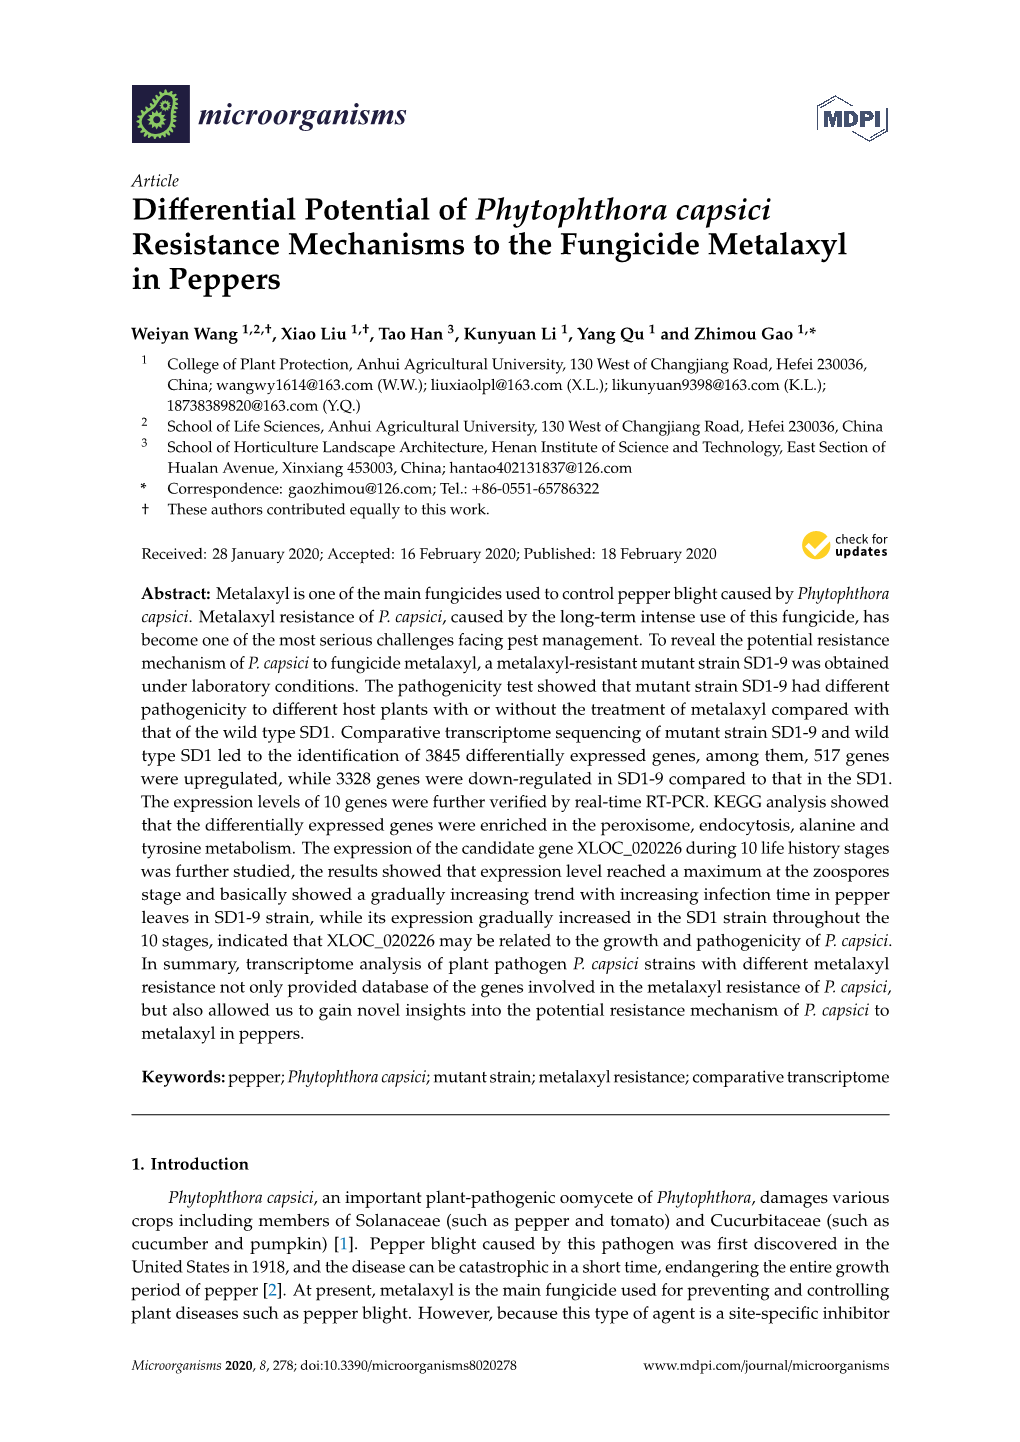 Differential Potential of Phytophthora Capsici Resistance Mechanisms To